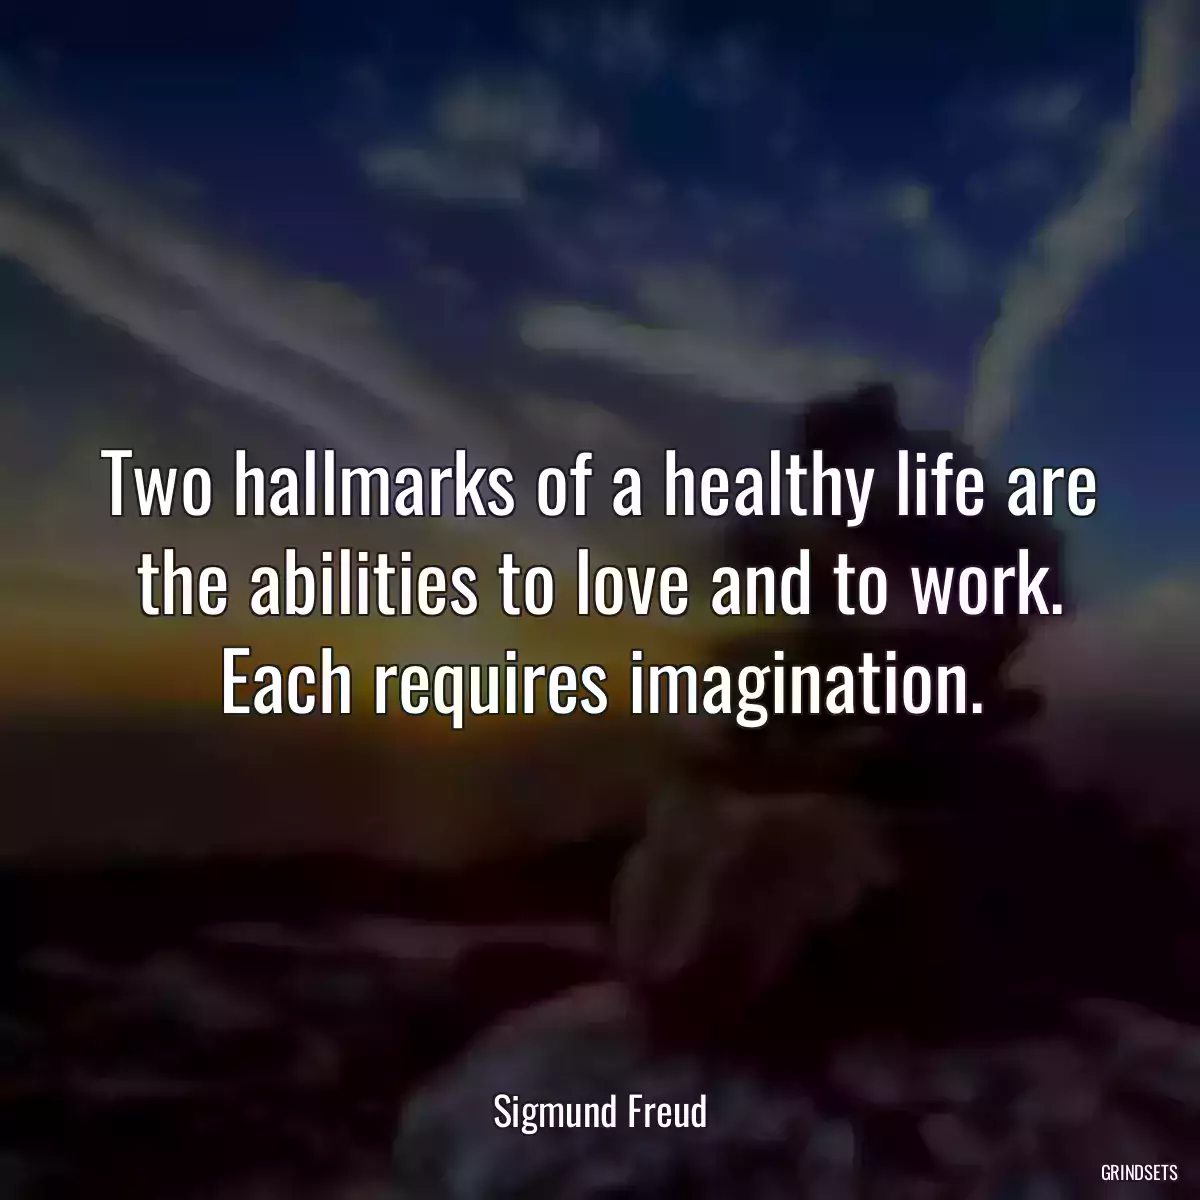 Two hallmarks of a healthy life are the abilities to love and to work. Each requires imagination.